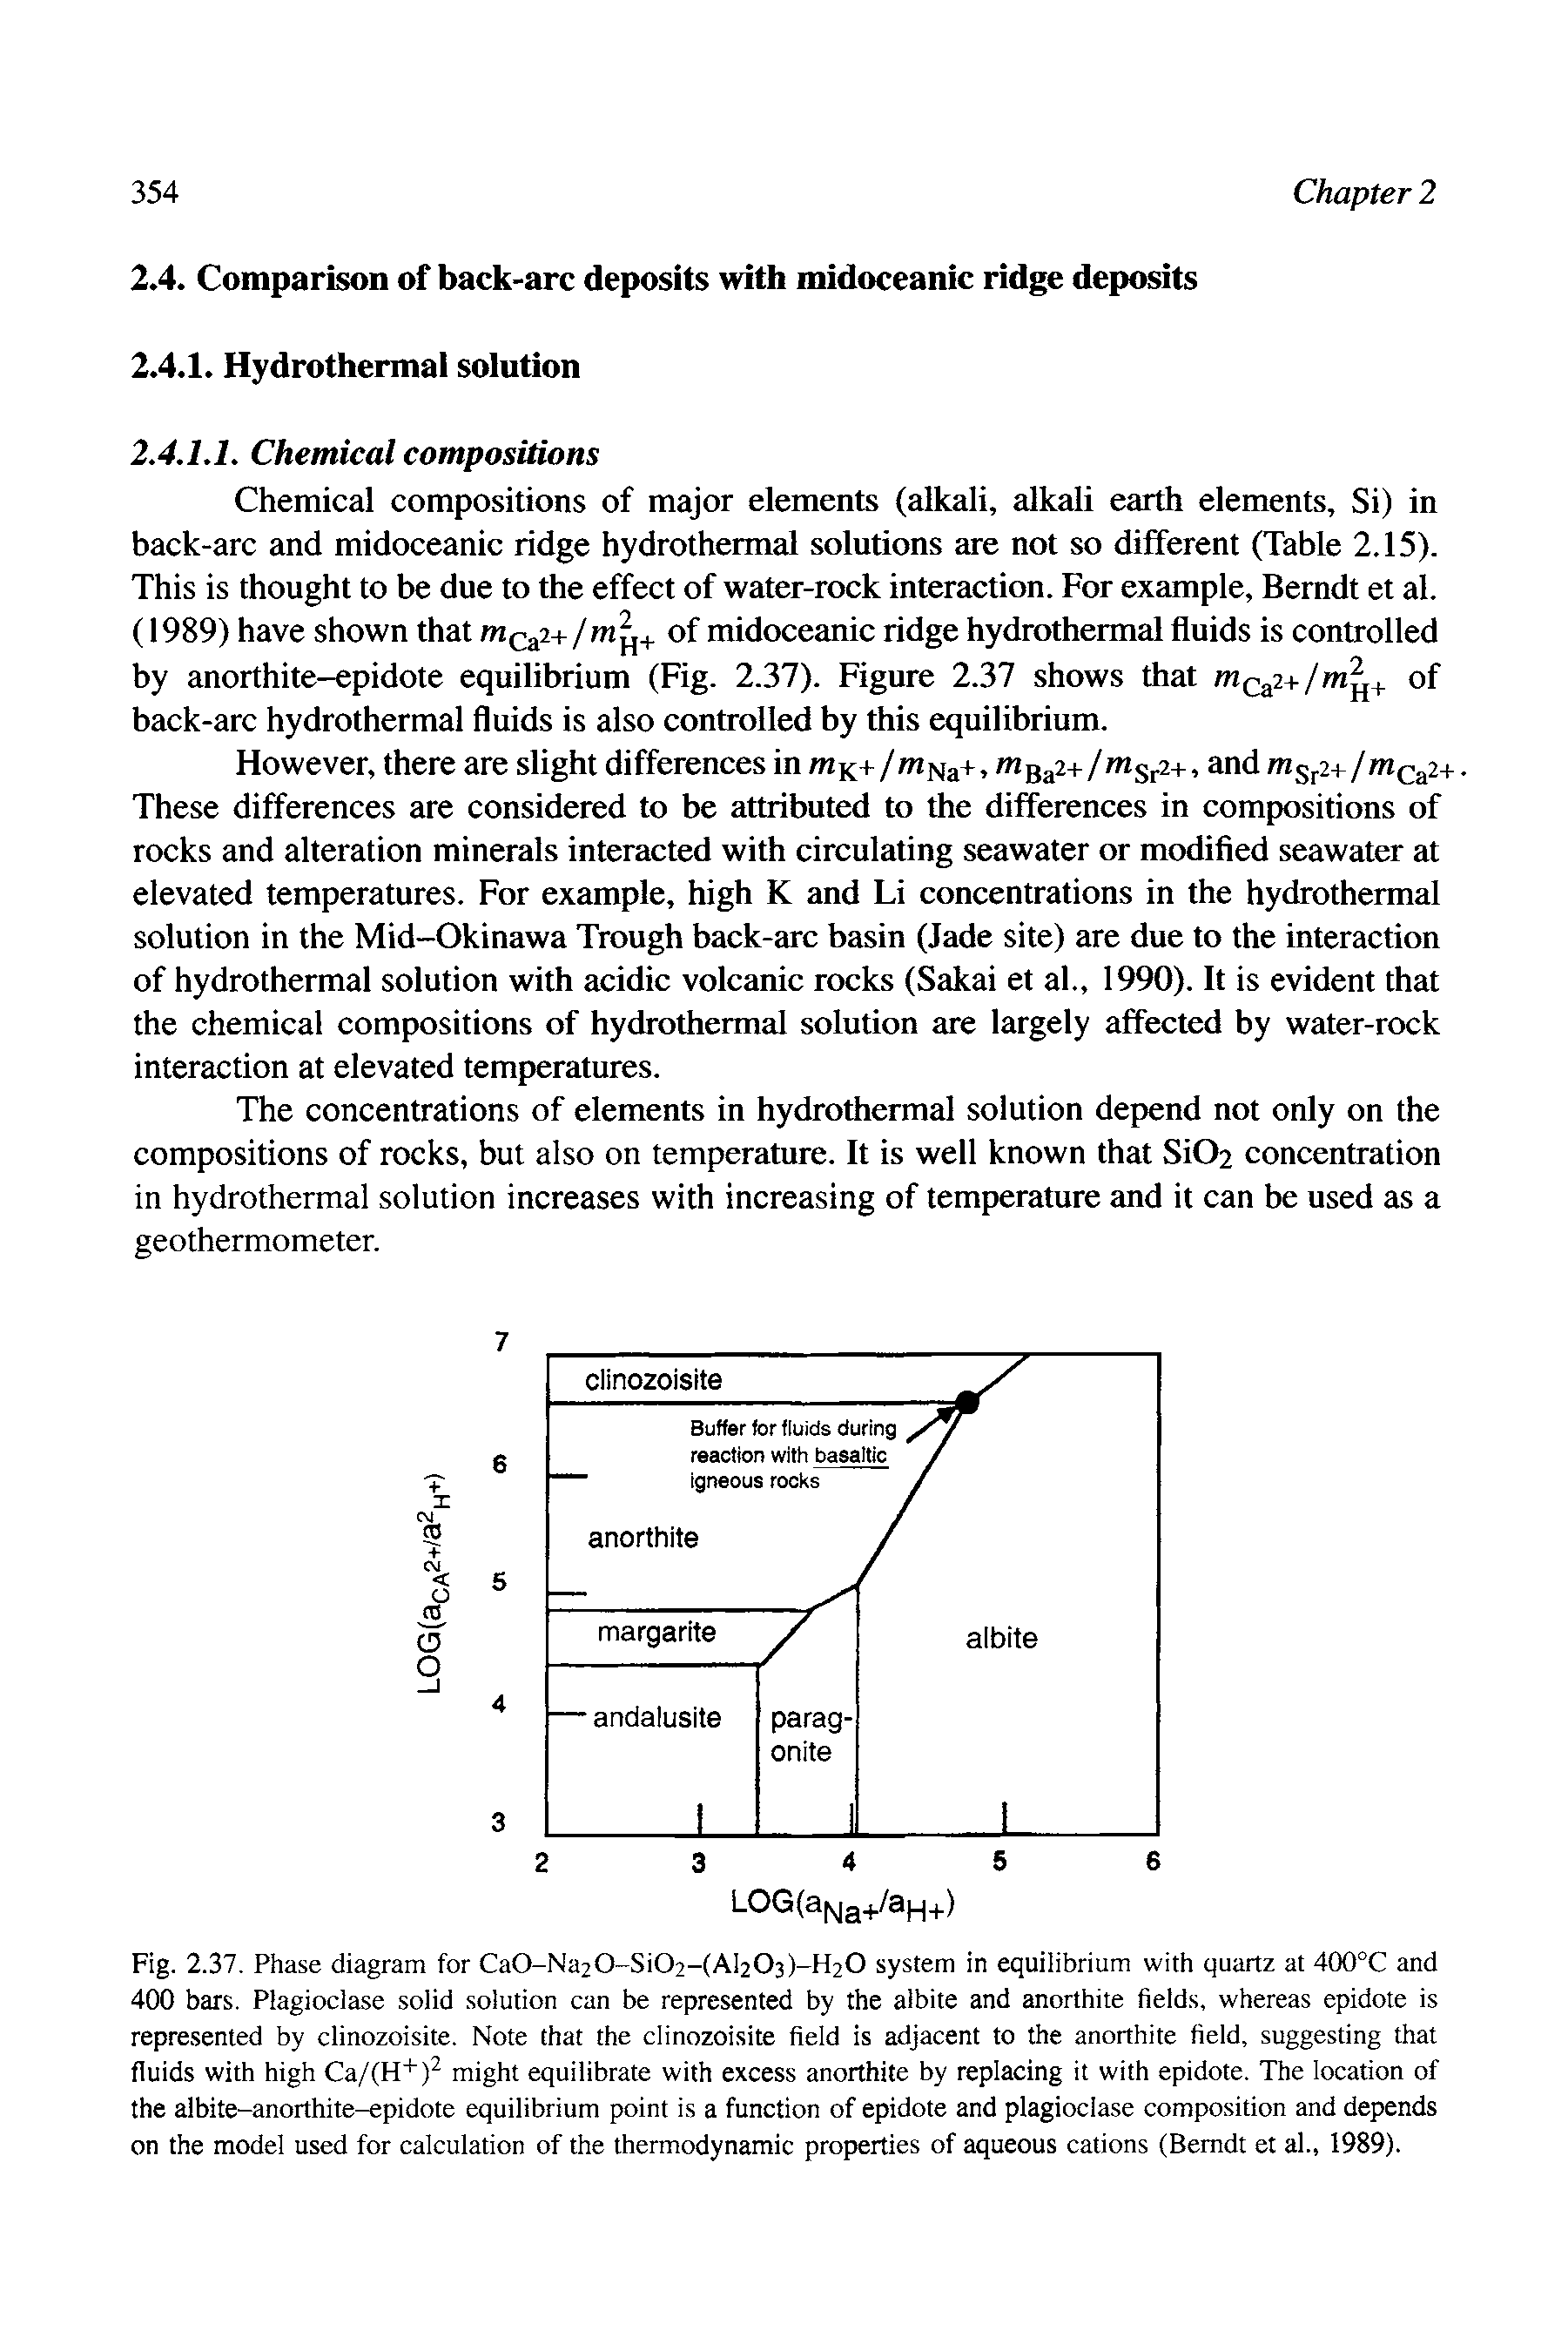 Fig. 2.37. Phase diagram for Ca0-Na20 Si02-(Al203)-H20 system in equilibrium with quartz at 400°C and 400 bars. Plagioclase solid solution can be represented by the albite and anorthite fields, whereas epidote is represented by clinozoisite. Note that the clinozoisite field is adjacent to the anorthite field, suggesting that fluids with high Ca/(H+) might equilibrate with excess anorthite by replacing it with epidote. The location of the albite-anorthite-epidote equilibrium point is a function of epidote and plagioclase composition and depends on the model used for calculation of the thermodynamic properties of aqueous cations (Berndt et al., 1989).